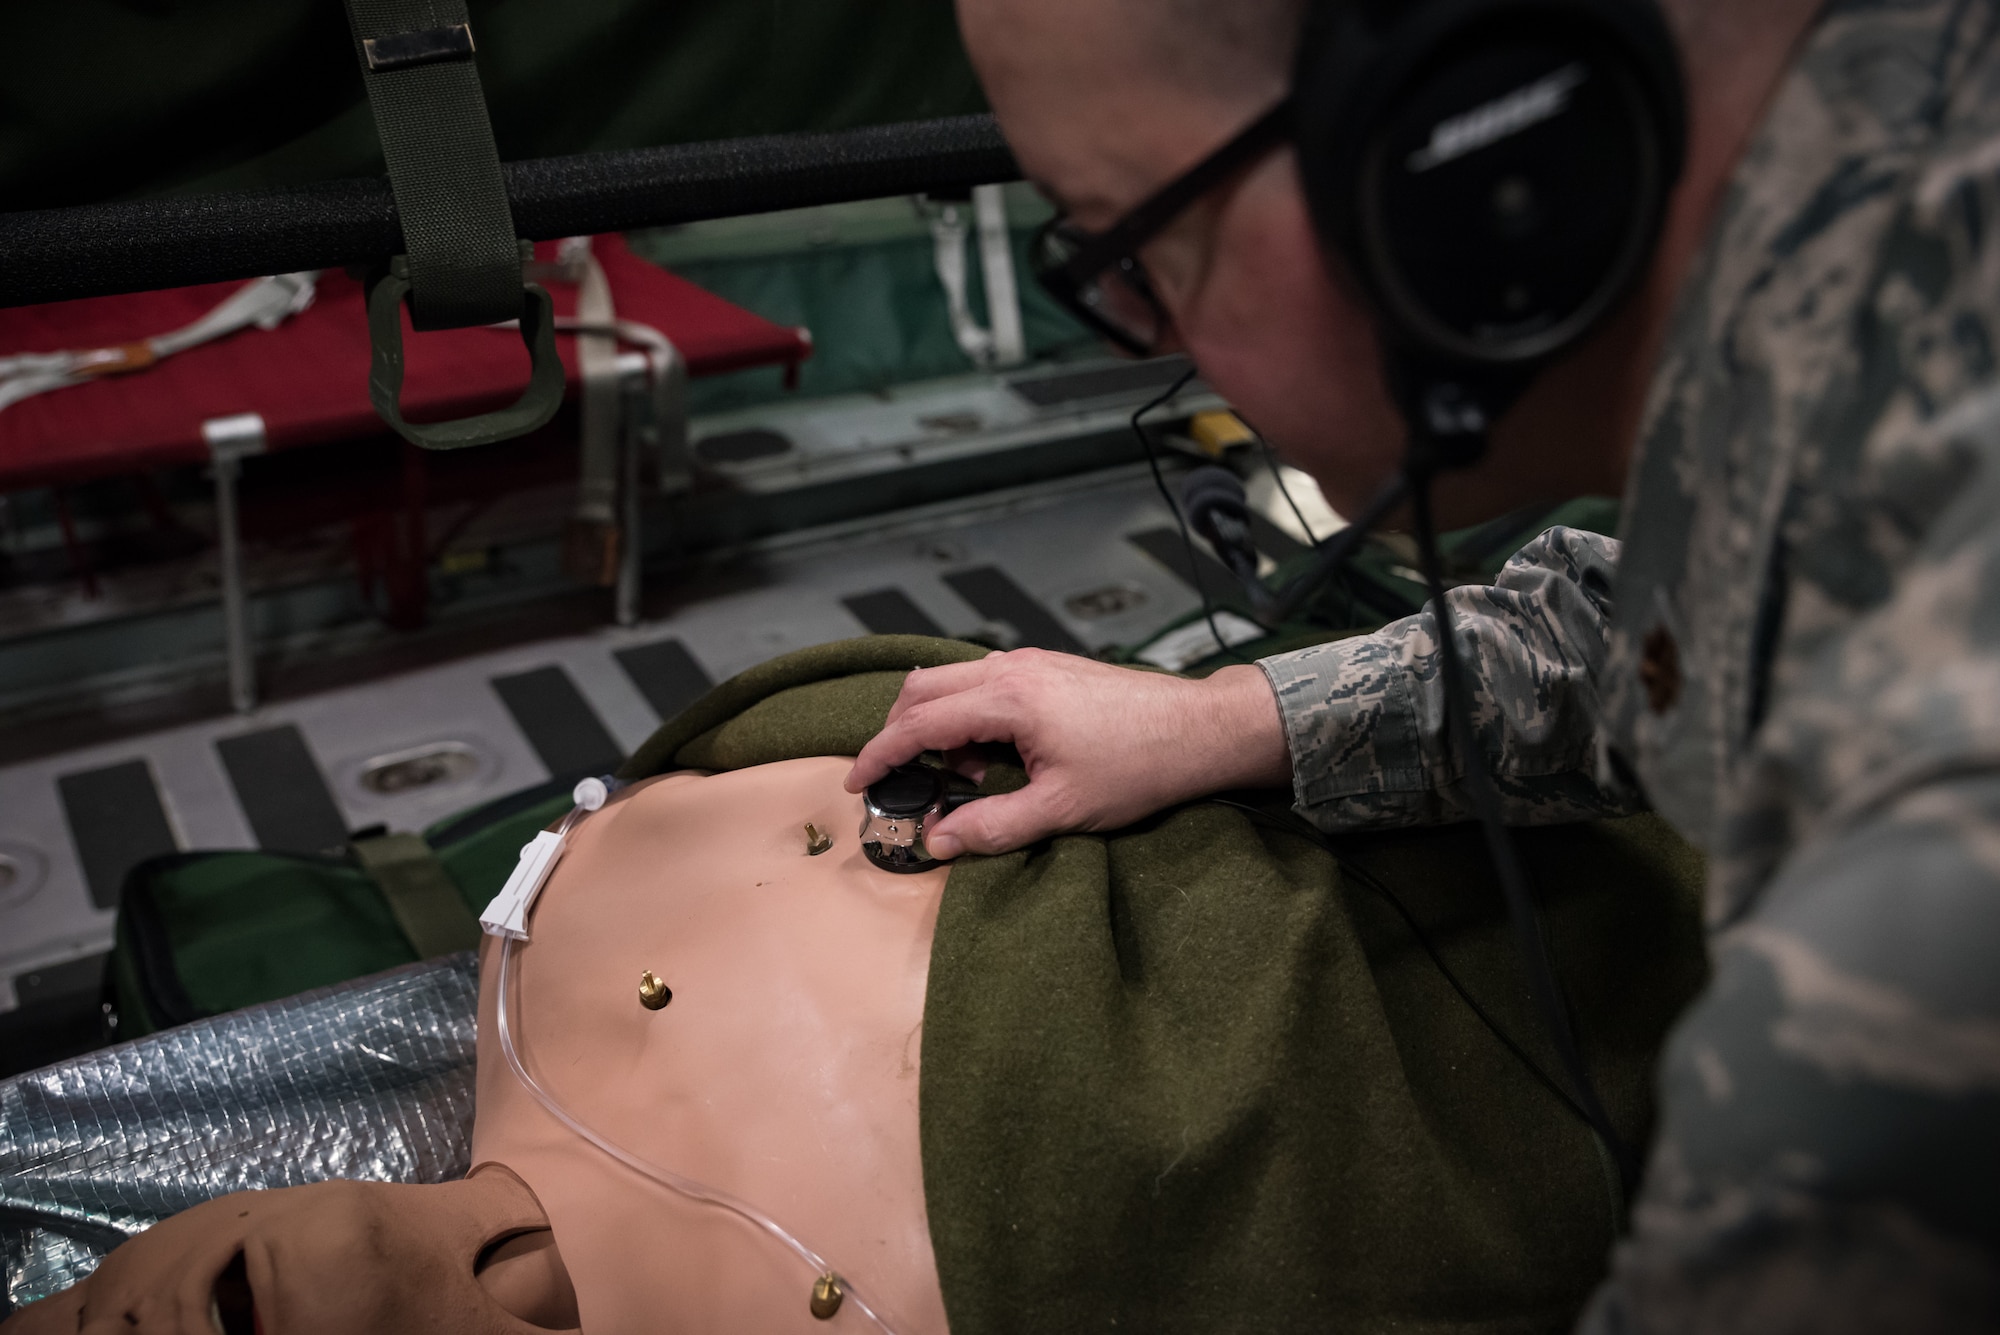 While testing the new wireless high-noise filtering stethoscope, Maj. Daniel Bevington, a nurse researcher in the 711th Human Performance Wing of the Air Force Research Laboratory, places the device on a mannequin’s chest to listen to internal sounds. (U.S. Air Force photo/Richard Eldridge)